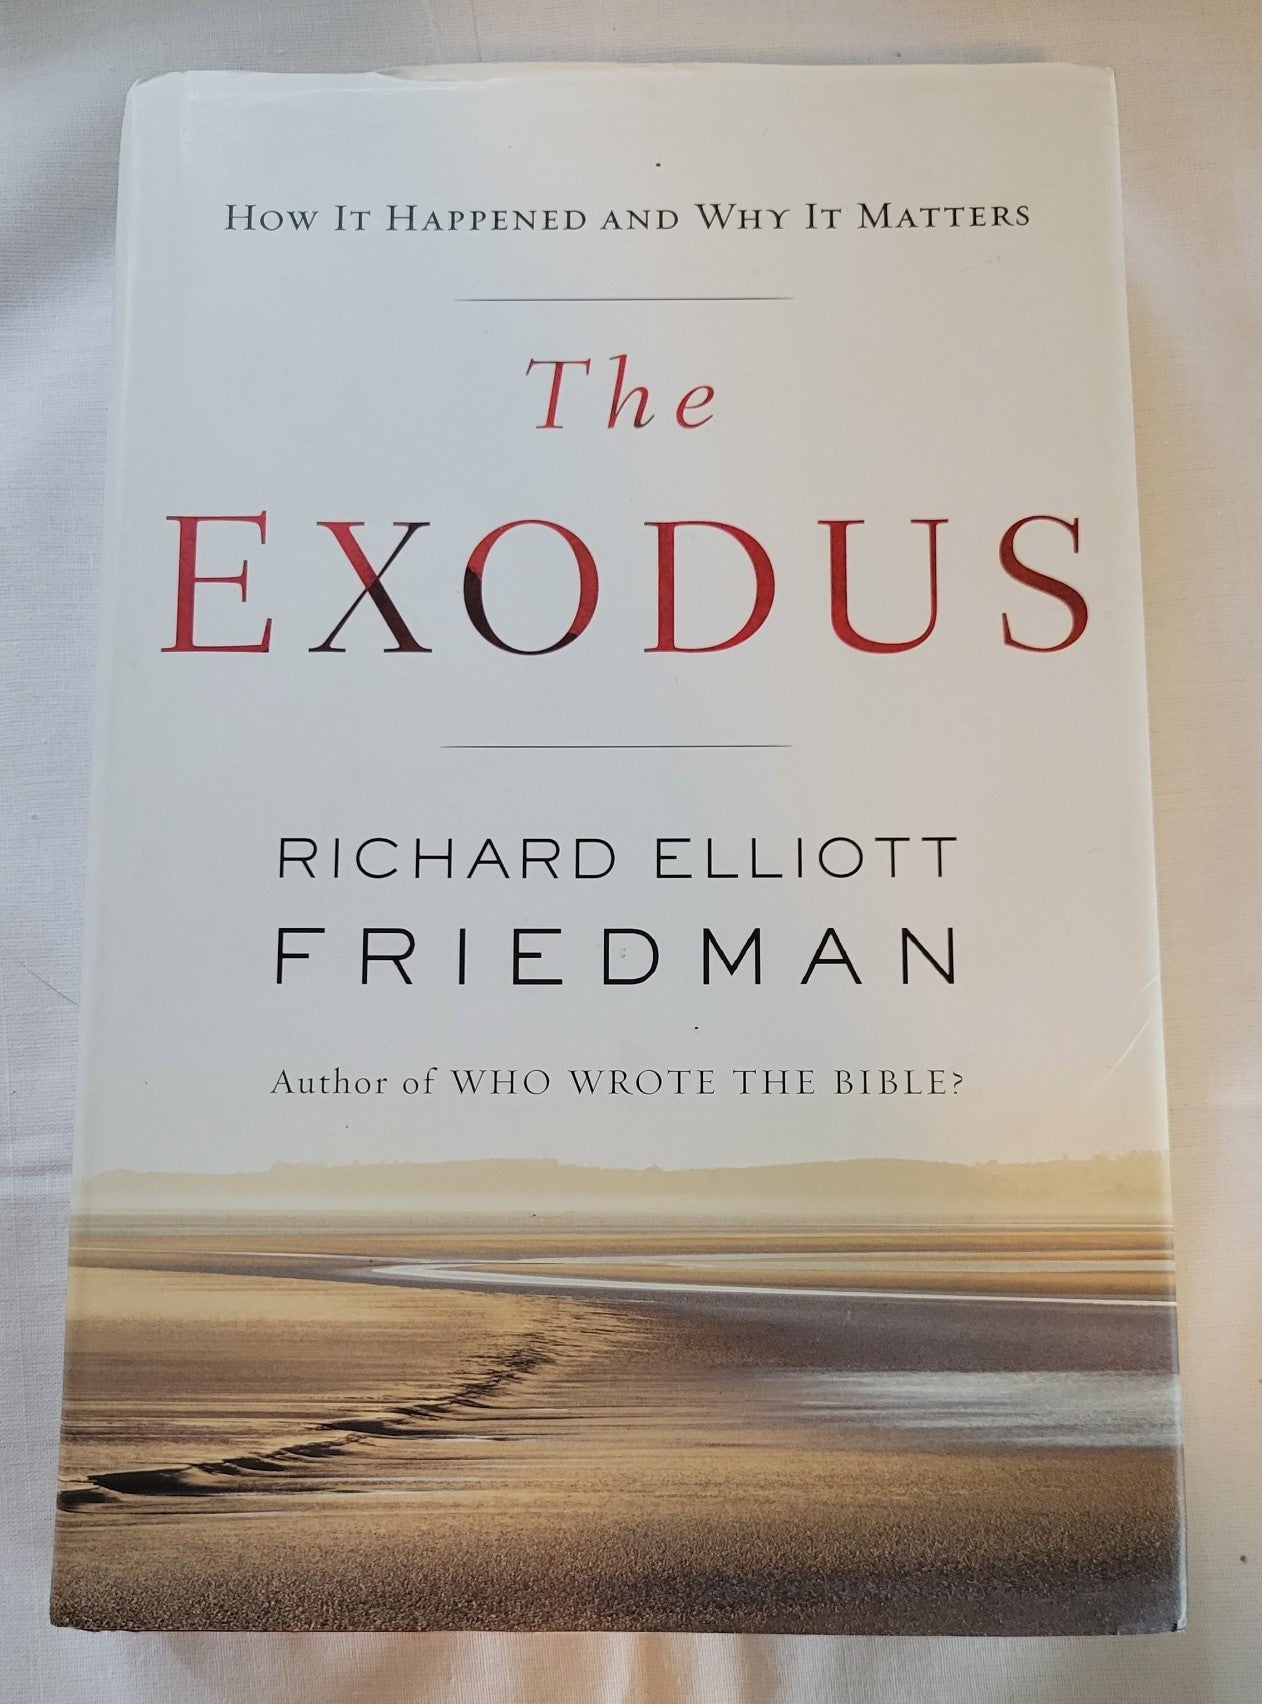 Used book for sale “The Exodus” written by Richard Elliott Friedman. Front cover.